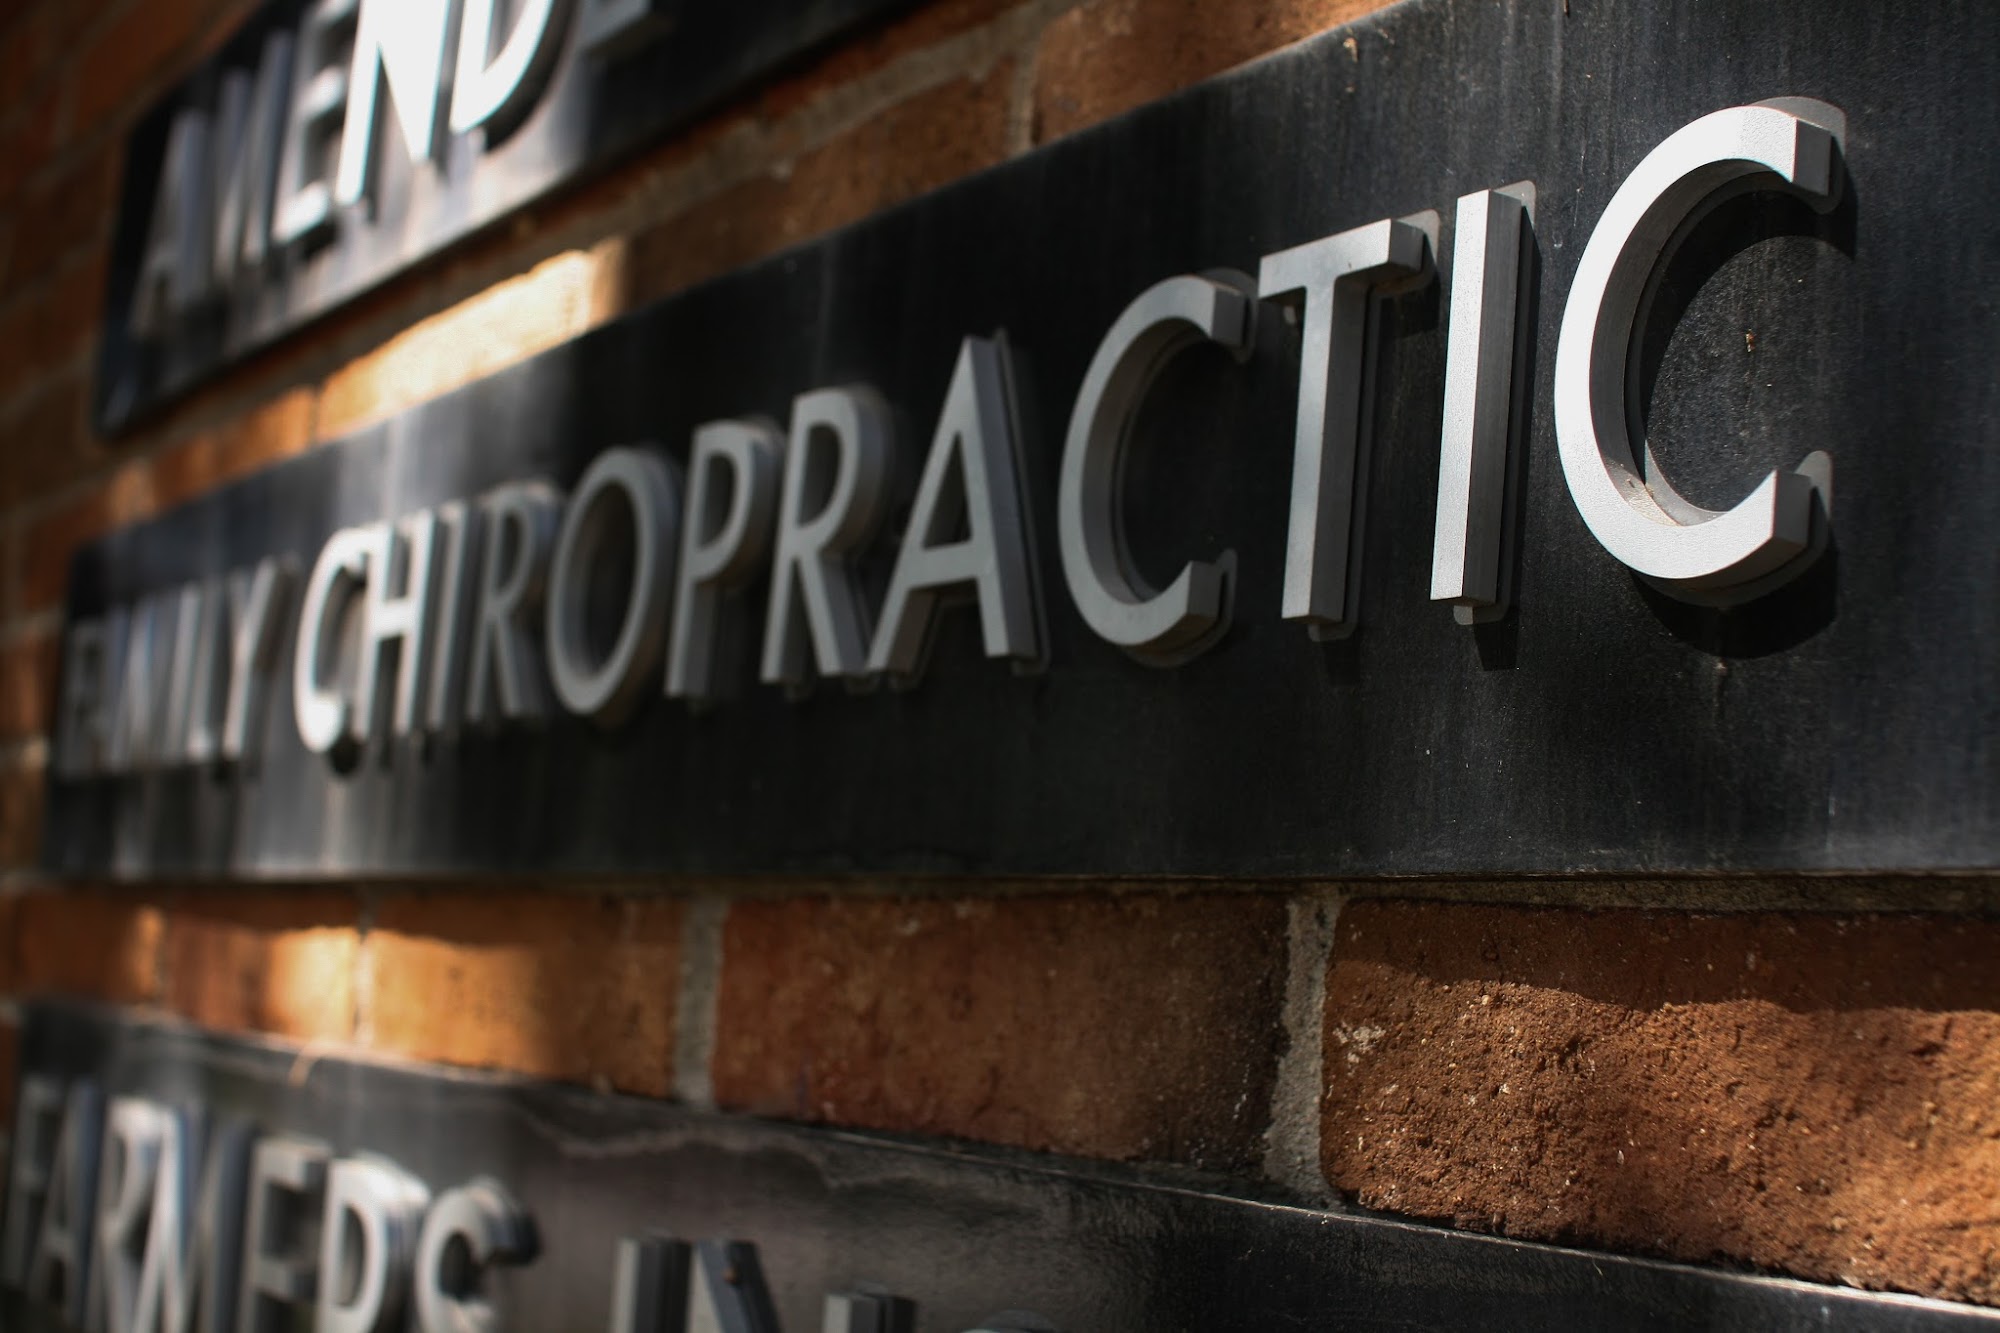 Family Chiropractic Center of South Pasadena